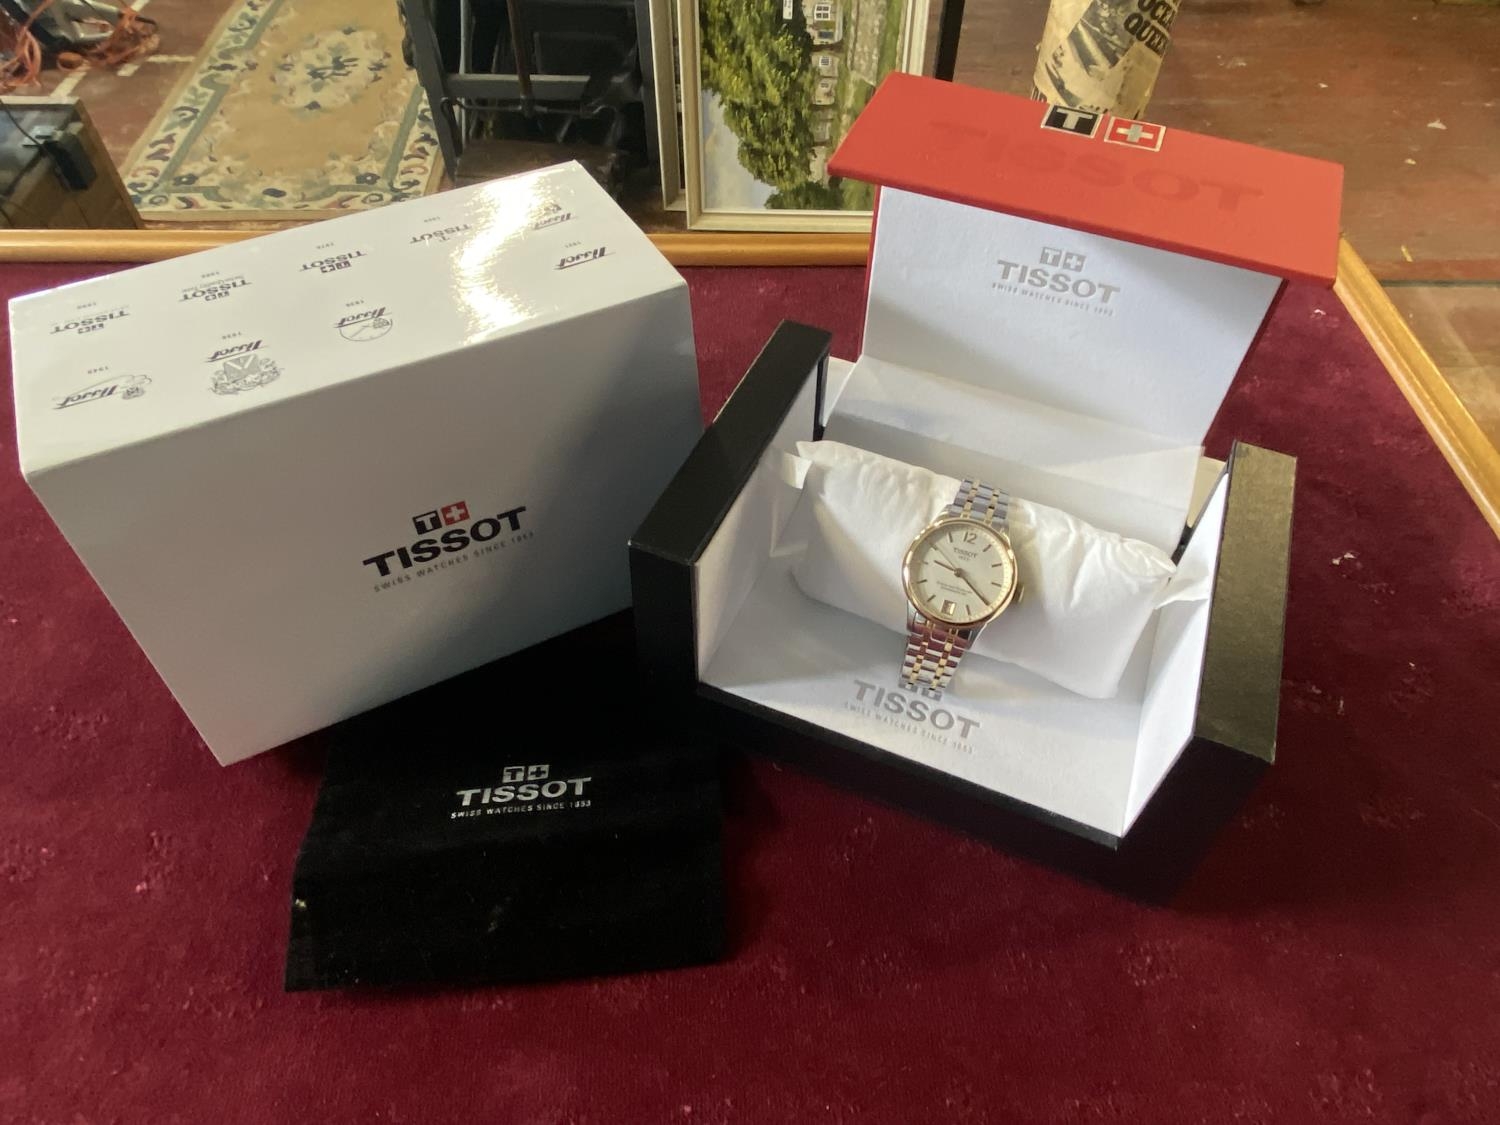 A new never worn still in original box and sleeve Tissot 1853 Chemin des Tourelles powermatic 80 - Image 2 of 3